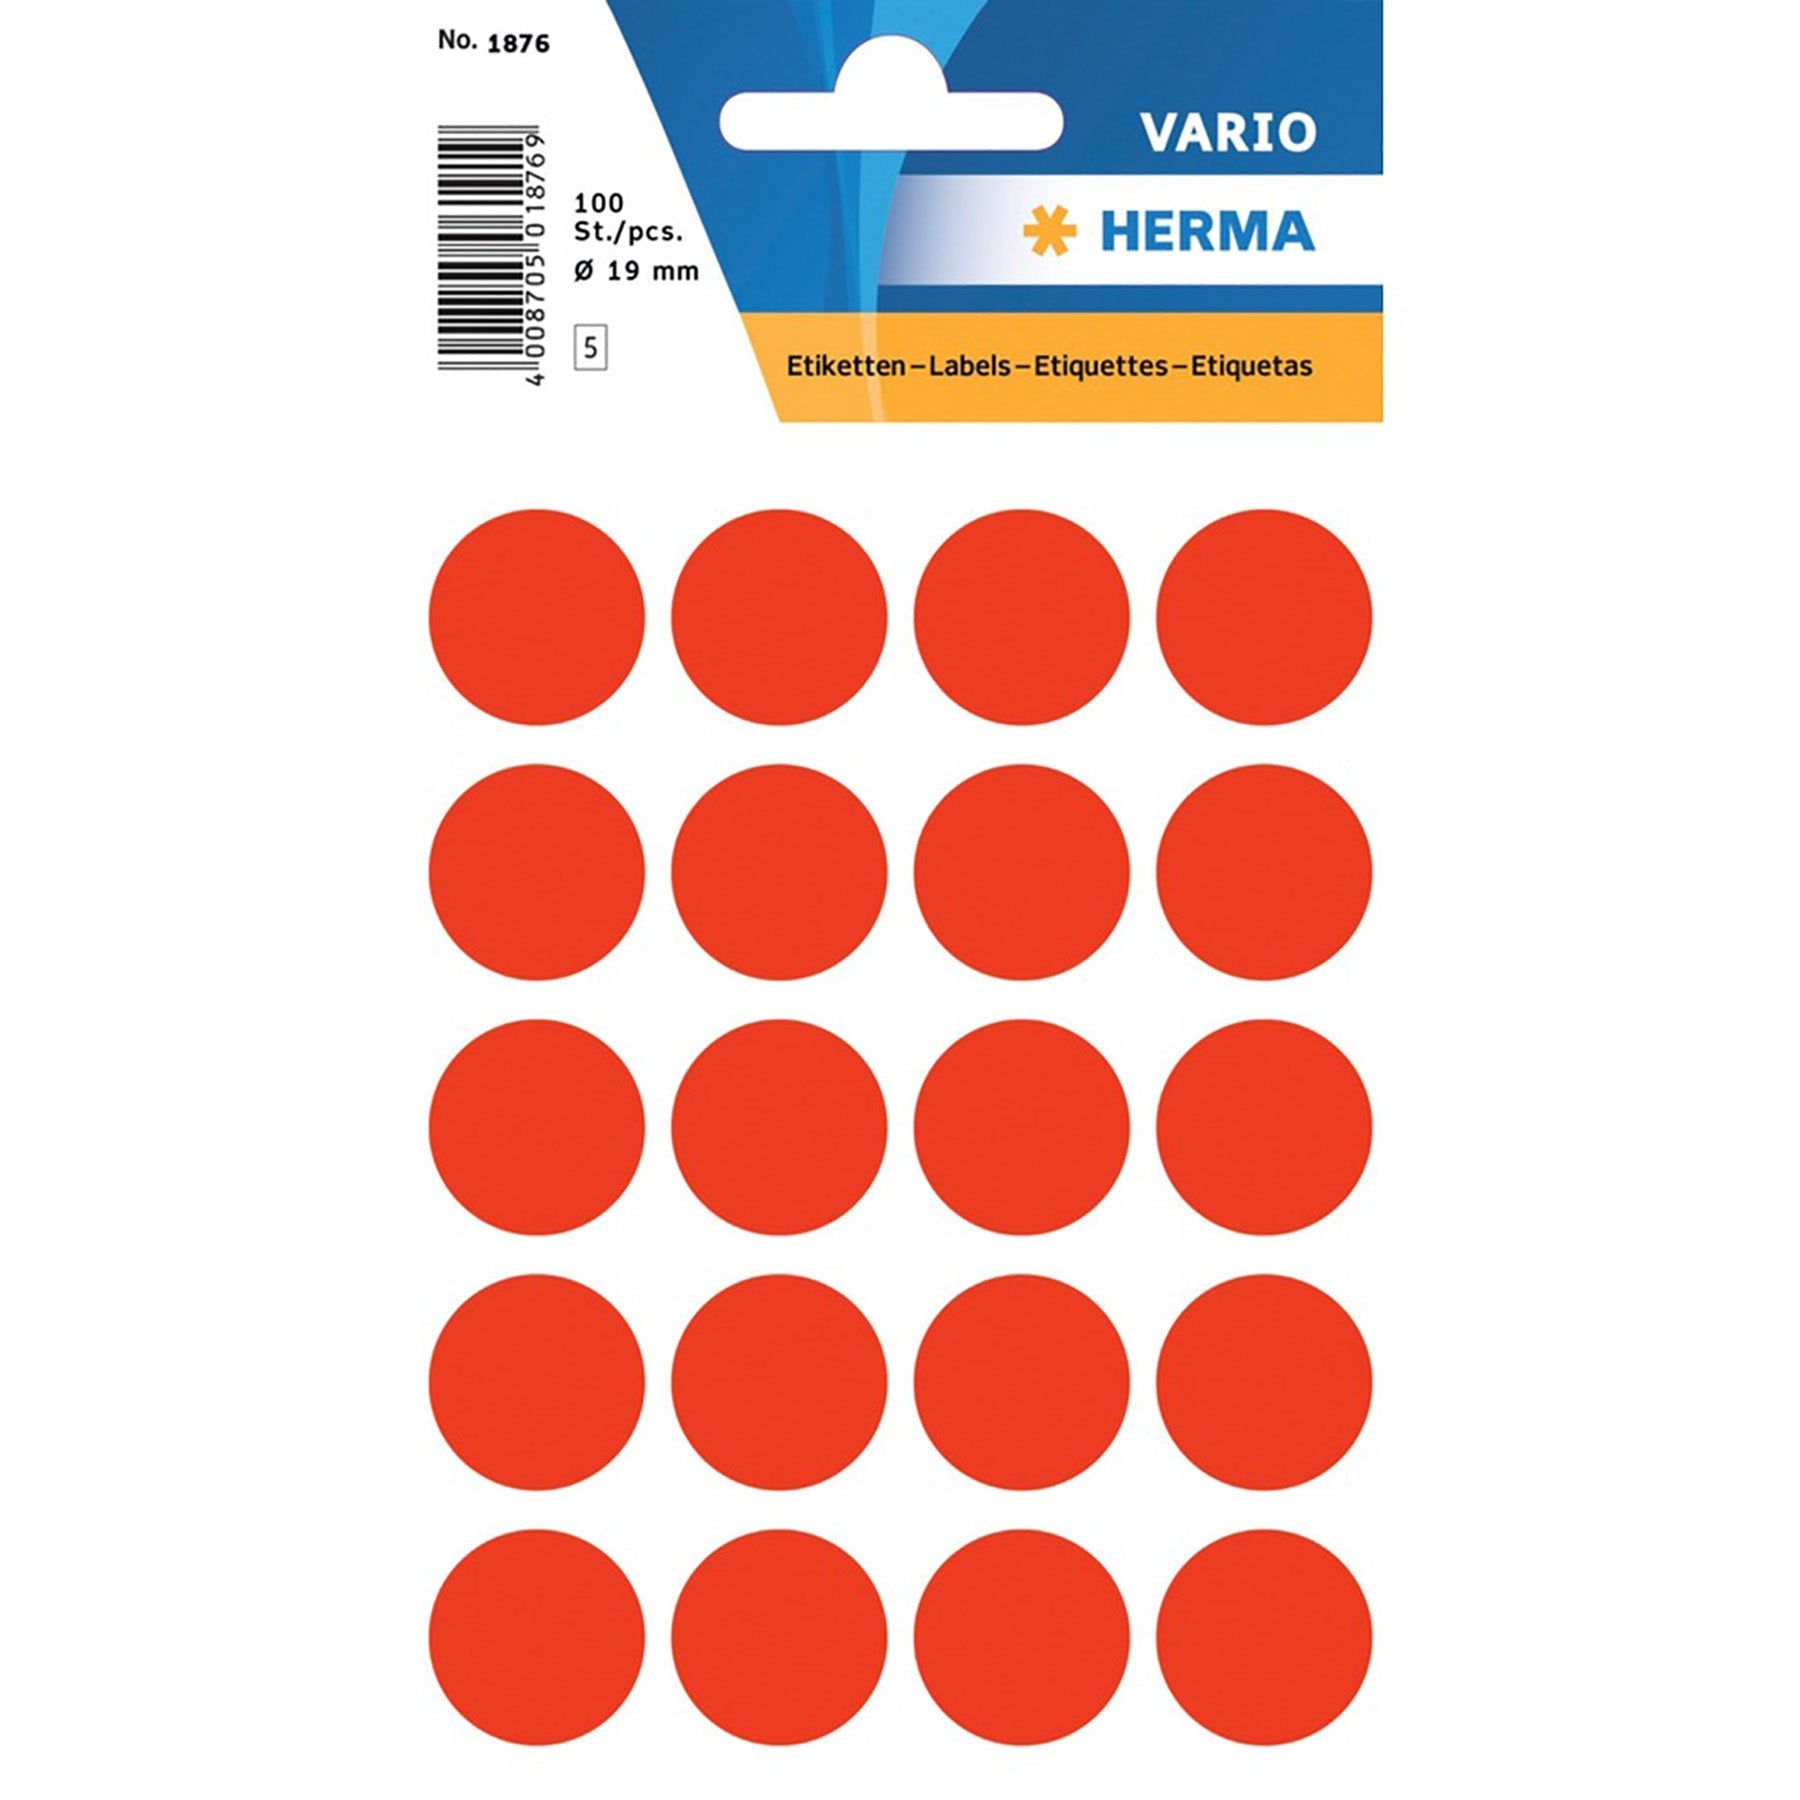 Herma Vario 5 Sheets Colour-Coding Round Labels Dots, Fluo Red 0.75in